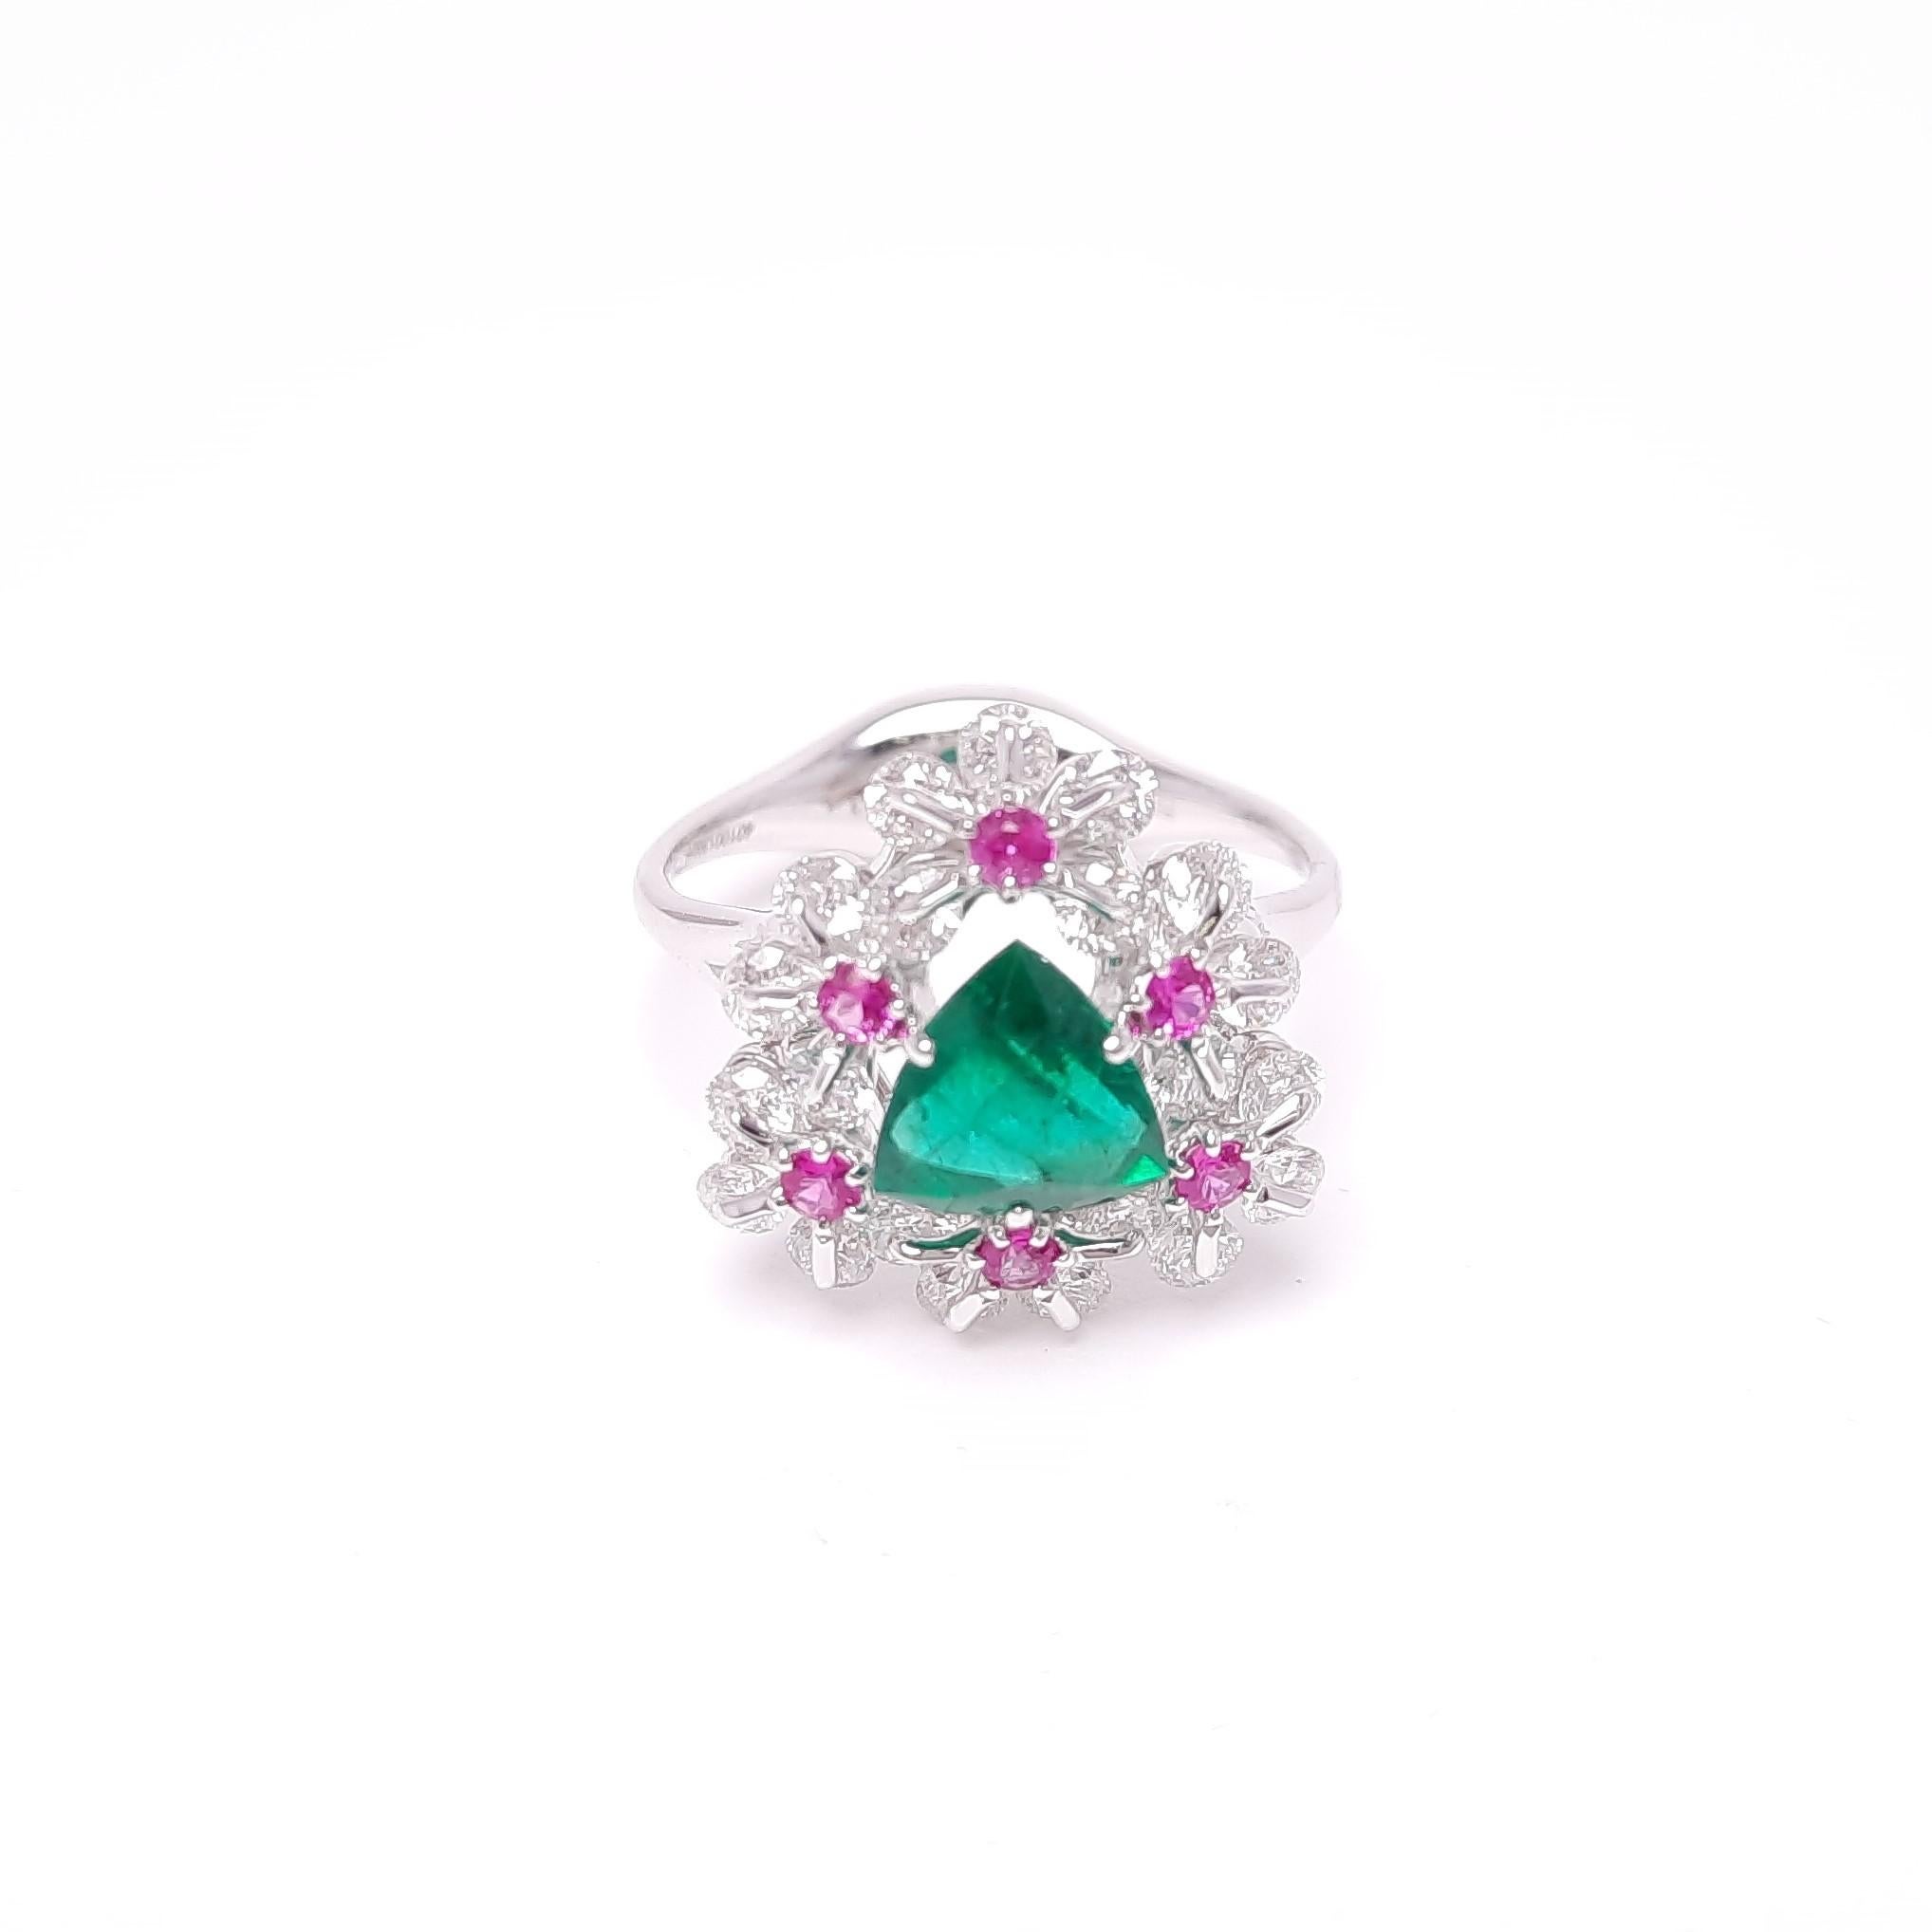 A Russian Emerald 1.15ct is designed in a floral frame with the modern Russian Setting 